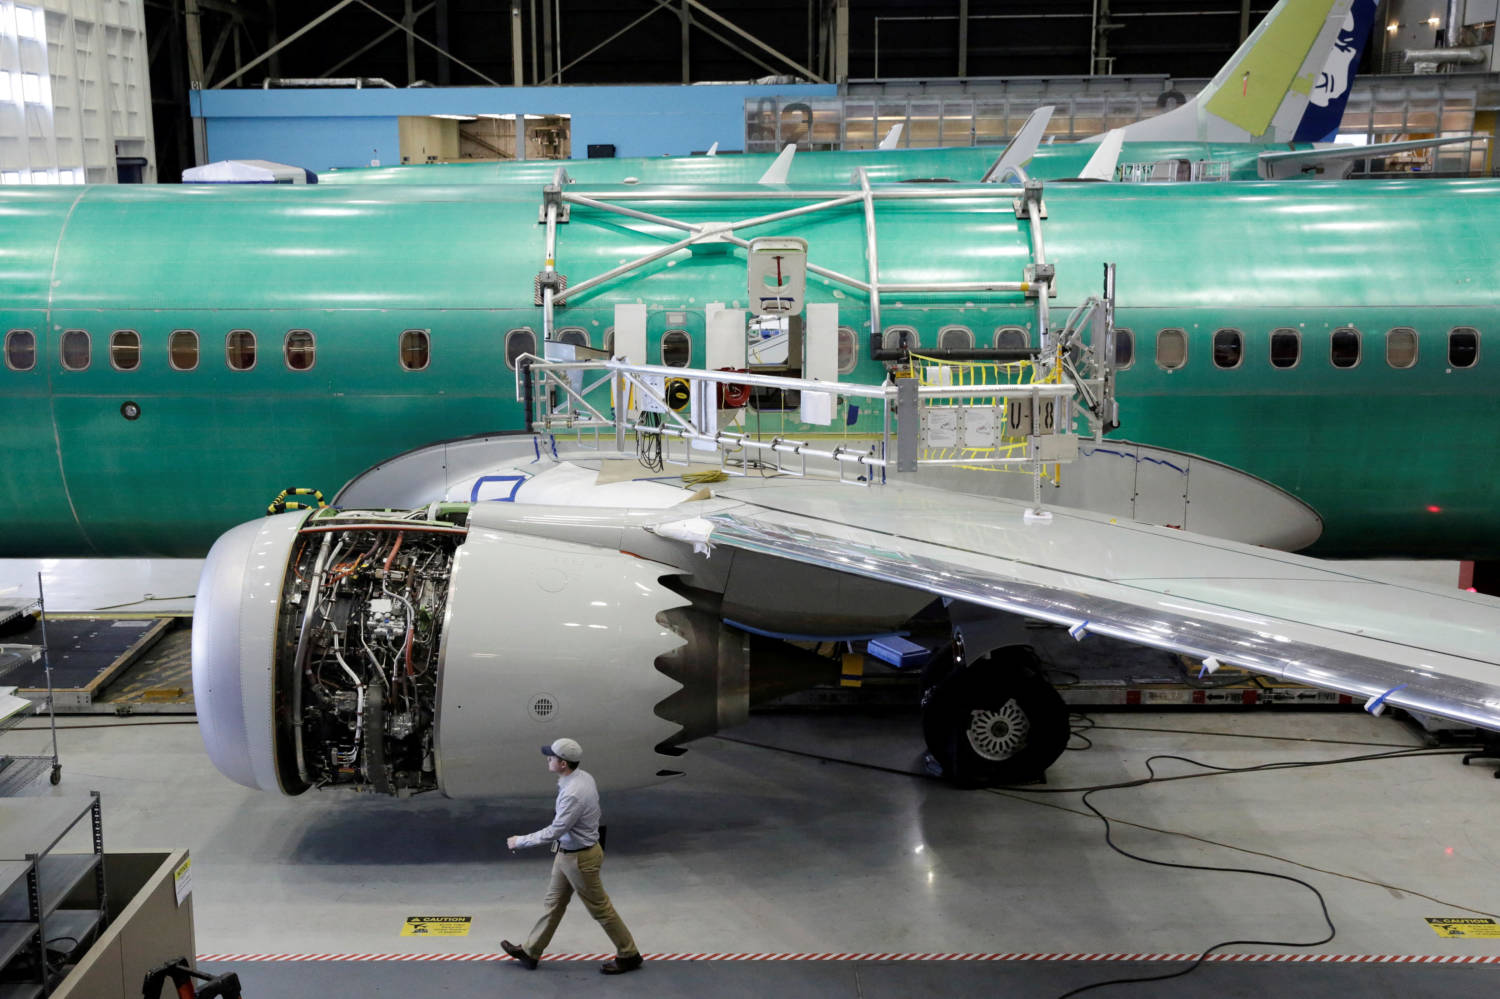 File Photo: A Worker Walks Past Boeing's New 737 Max 9 Under Construction At Their Production Facility In Renton, Washington